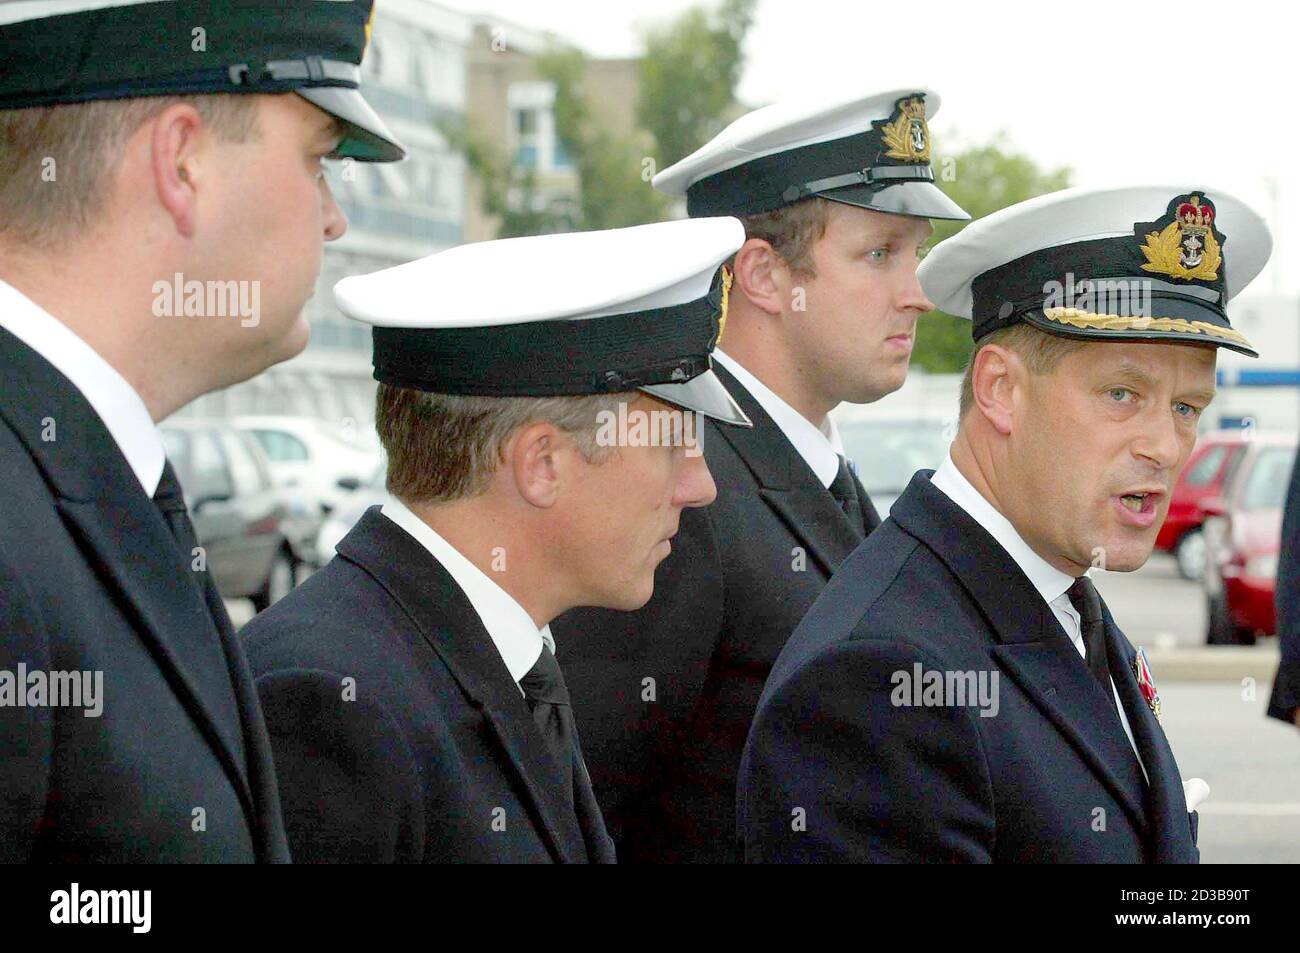 Commander Richard Farrington (R) addresses the media after a court martial hearing at Portsmouth Naval Base, flanked by L-R: Navigator Lieutenant Andrew Ingham, Lieutenant Commander John Lea, Lieutenant James Denney, September 11, 2003. Farrington was reprimanded for neglecting his duties on Thursday after his vessel HMS Nottingham ran aground near Lord Howe Island, 200 miles off the coast of Australia in July 2002, tearing a 100 ft hole down the side of the Type 42 destroyer and incurring a 42 million pounds ($66, 851, 400) repair bill. REUTERS/Lee Besford  MD Stock Photo